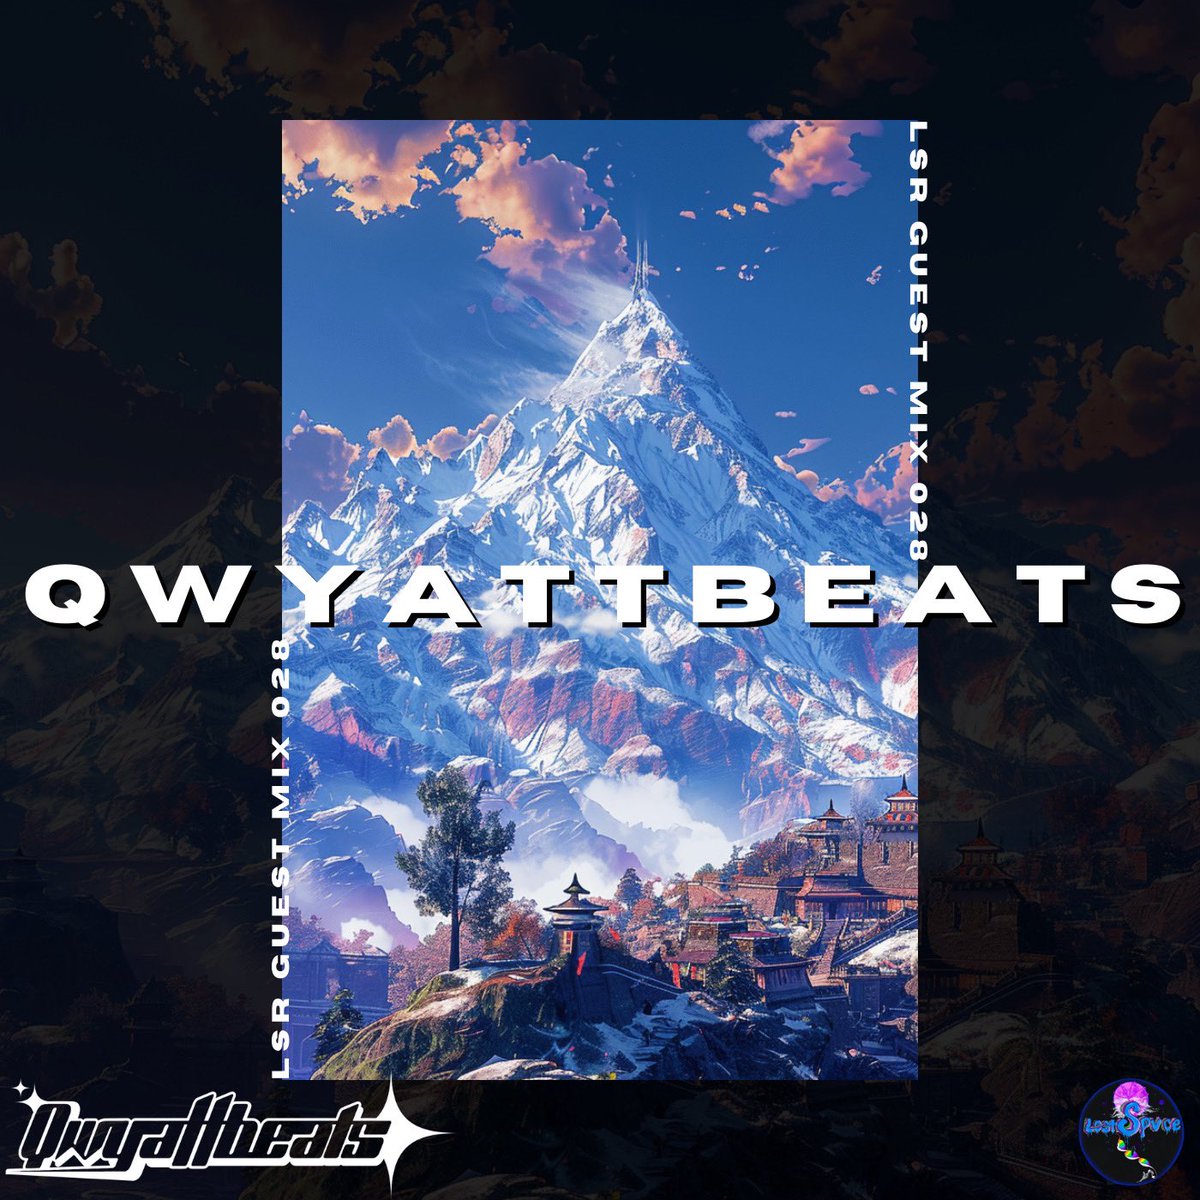 What's up homies?! New month, new guest mix! This month we have @qwyattbeats bringing in the heat! 🔥 If you like bass, this one is for you! Be sure to tune in on SoundCloud to hear banger after banger! Let us know how you like it 🤩